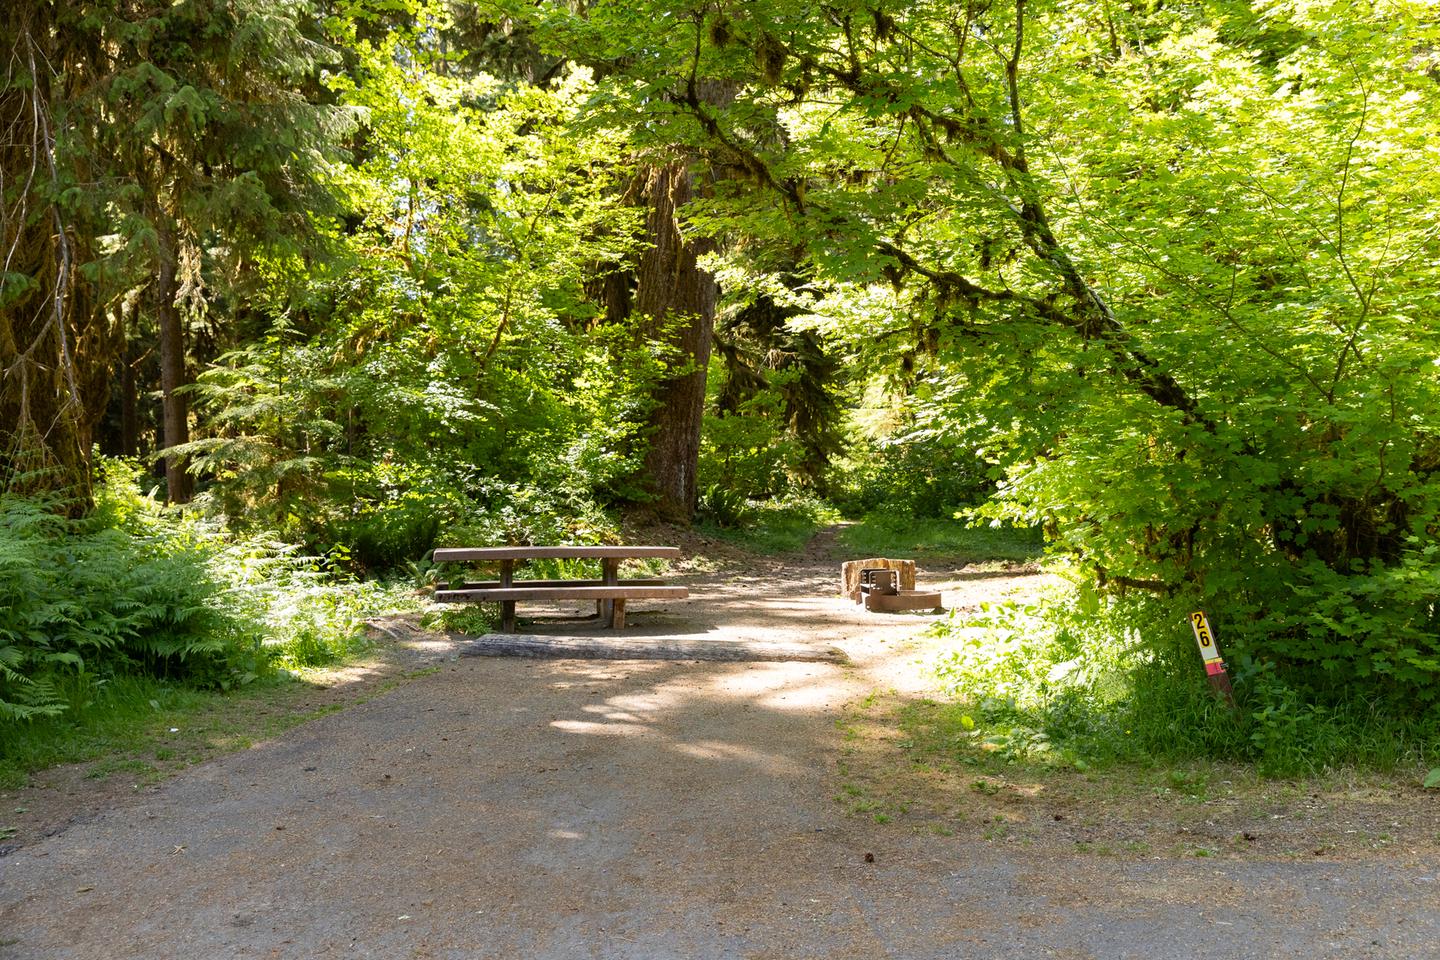 Campsite #26 with tree shaded area, picnic table, and gravel parking.Campsite #26